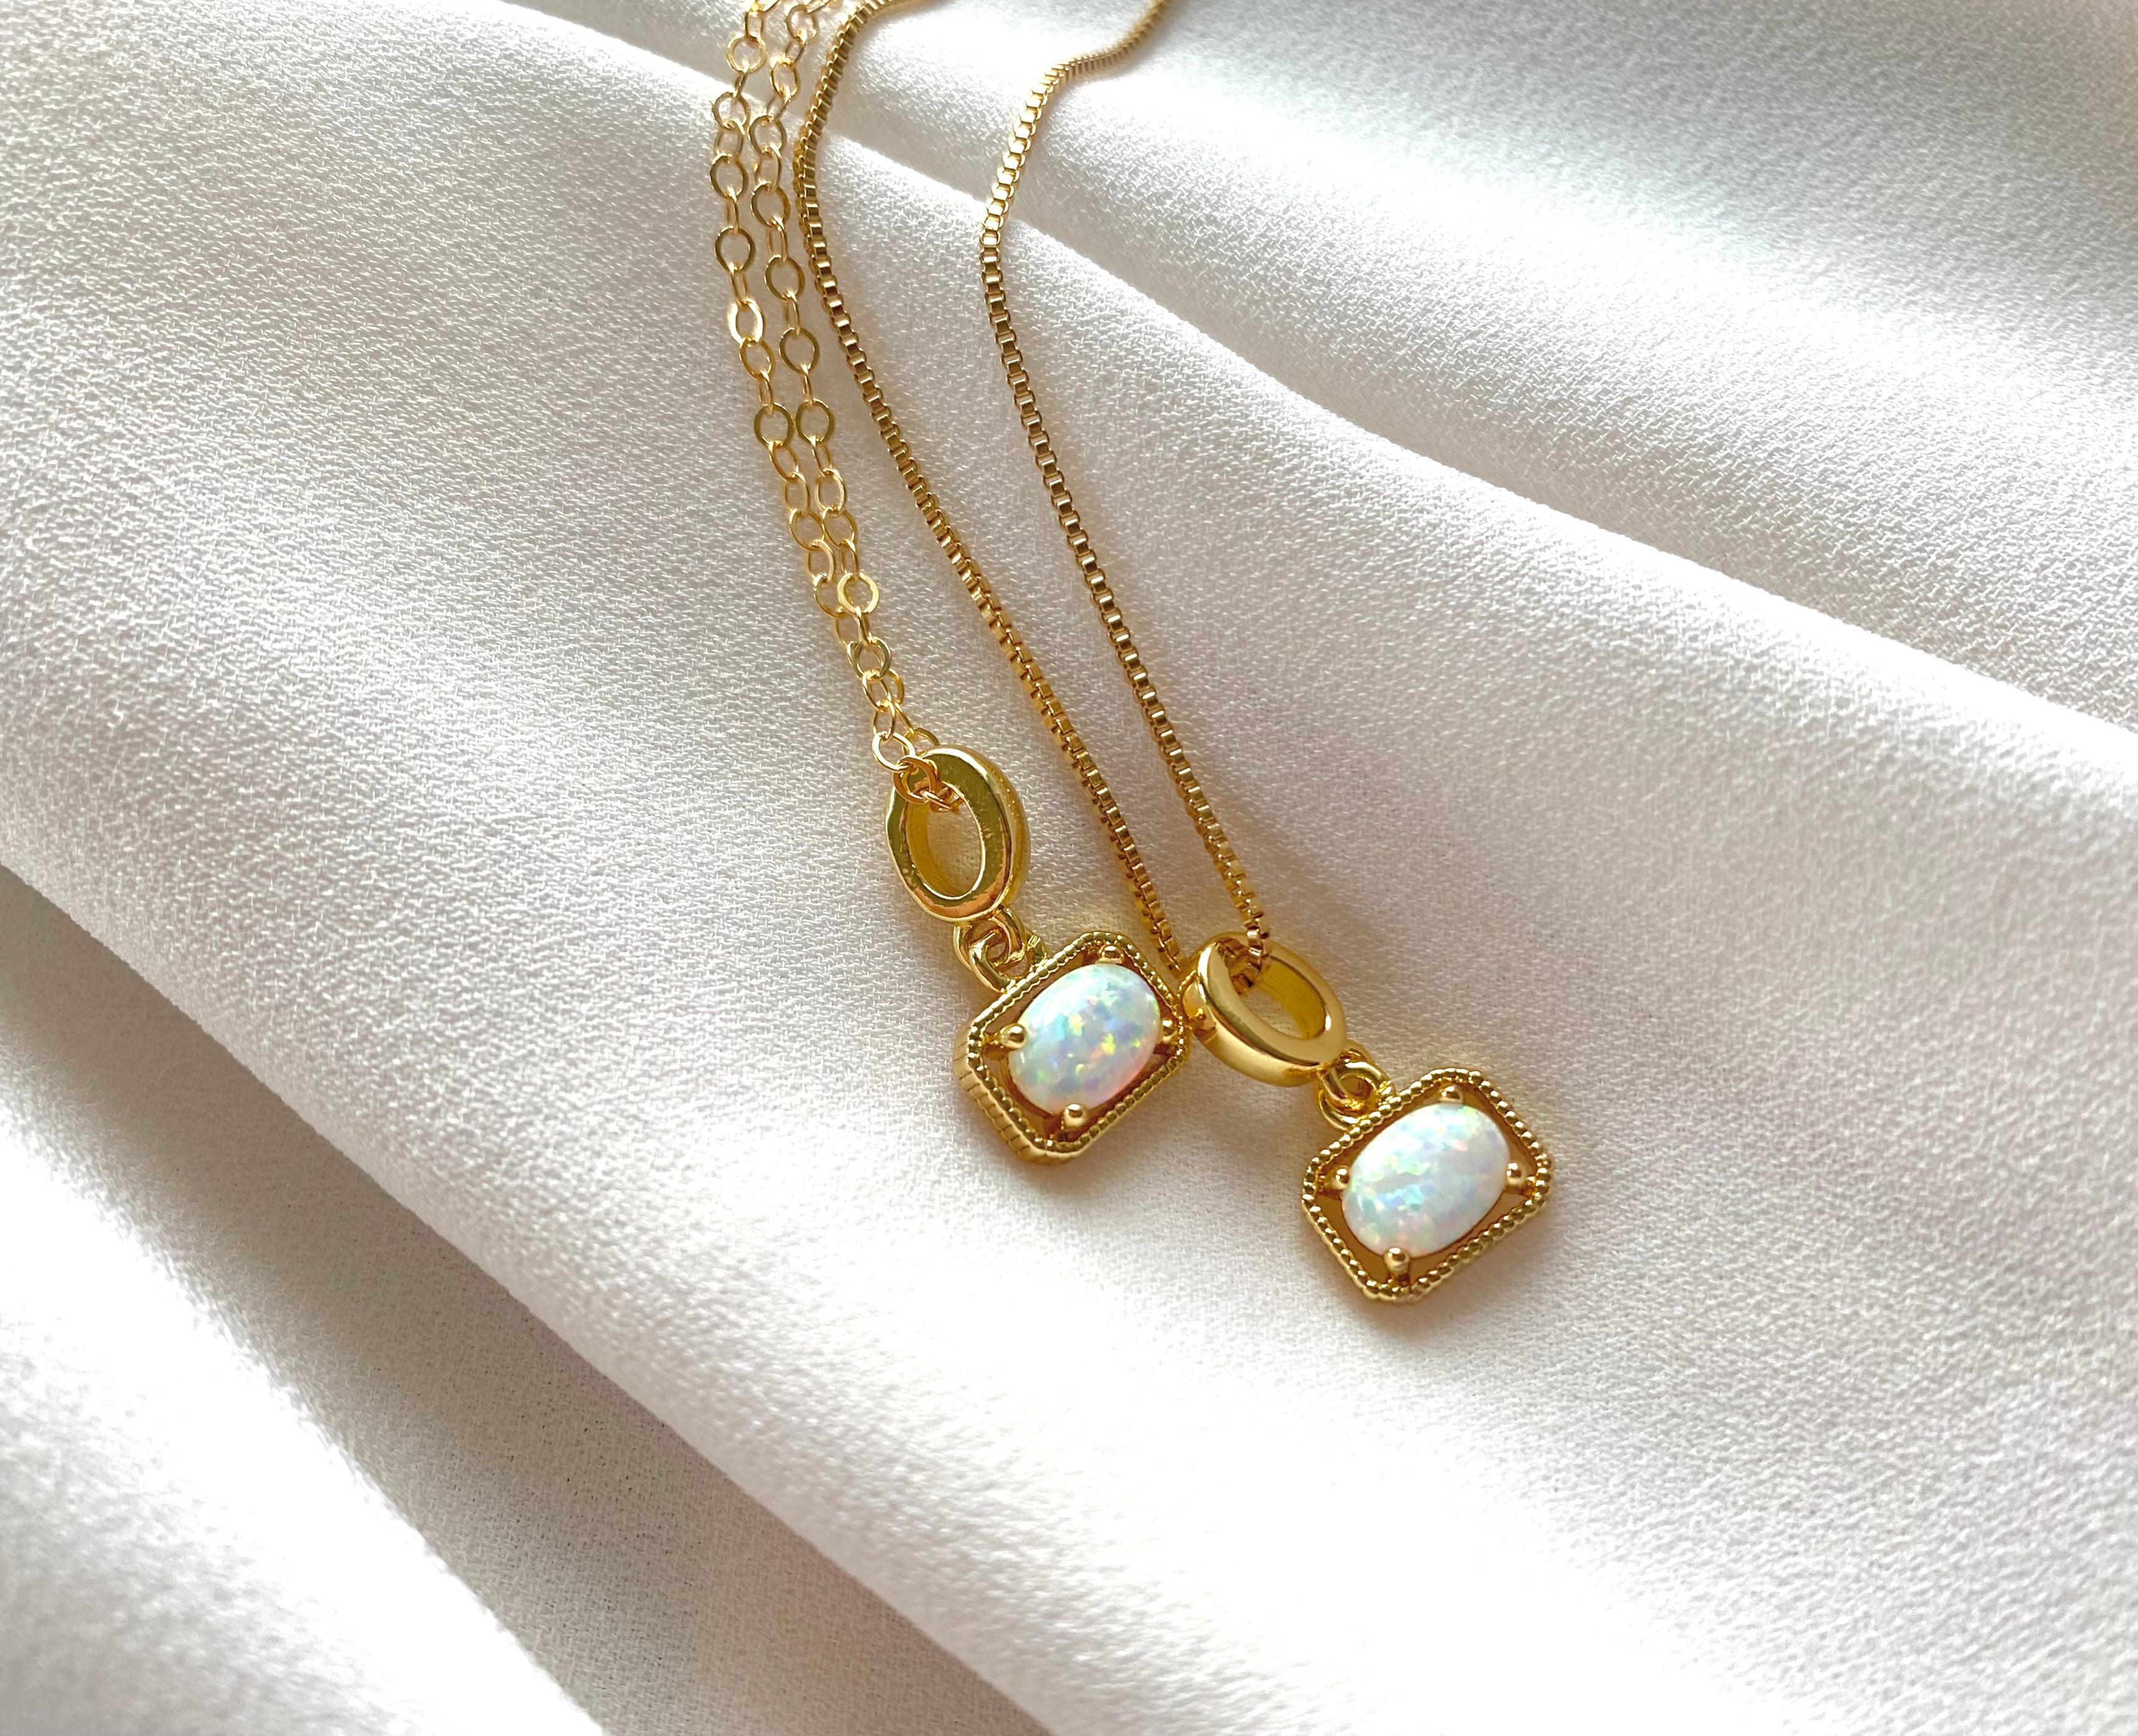 Opal Charm Necklace October Birthstone Jewelry Dainty Opal Necklace Gold Filled Opal Pendant Box Chain Christmas Gift Bridal Party Jewelry